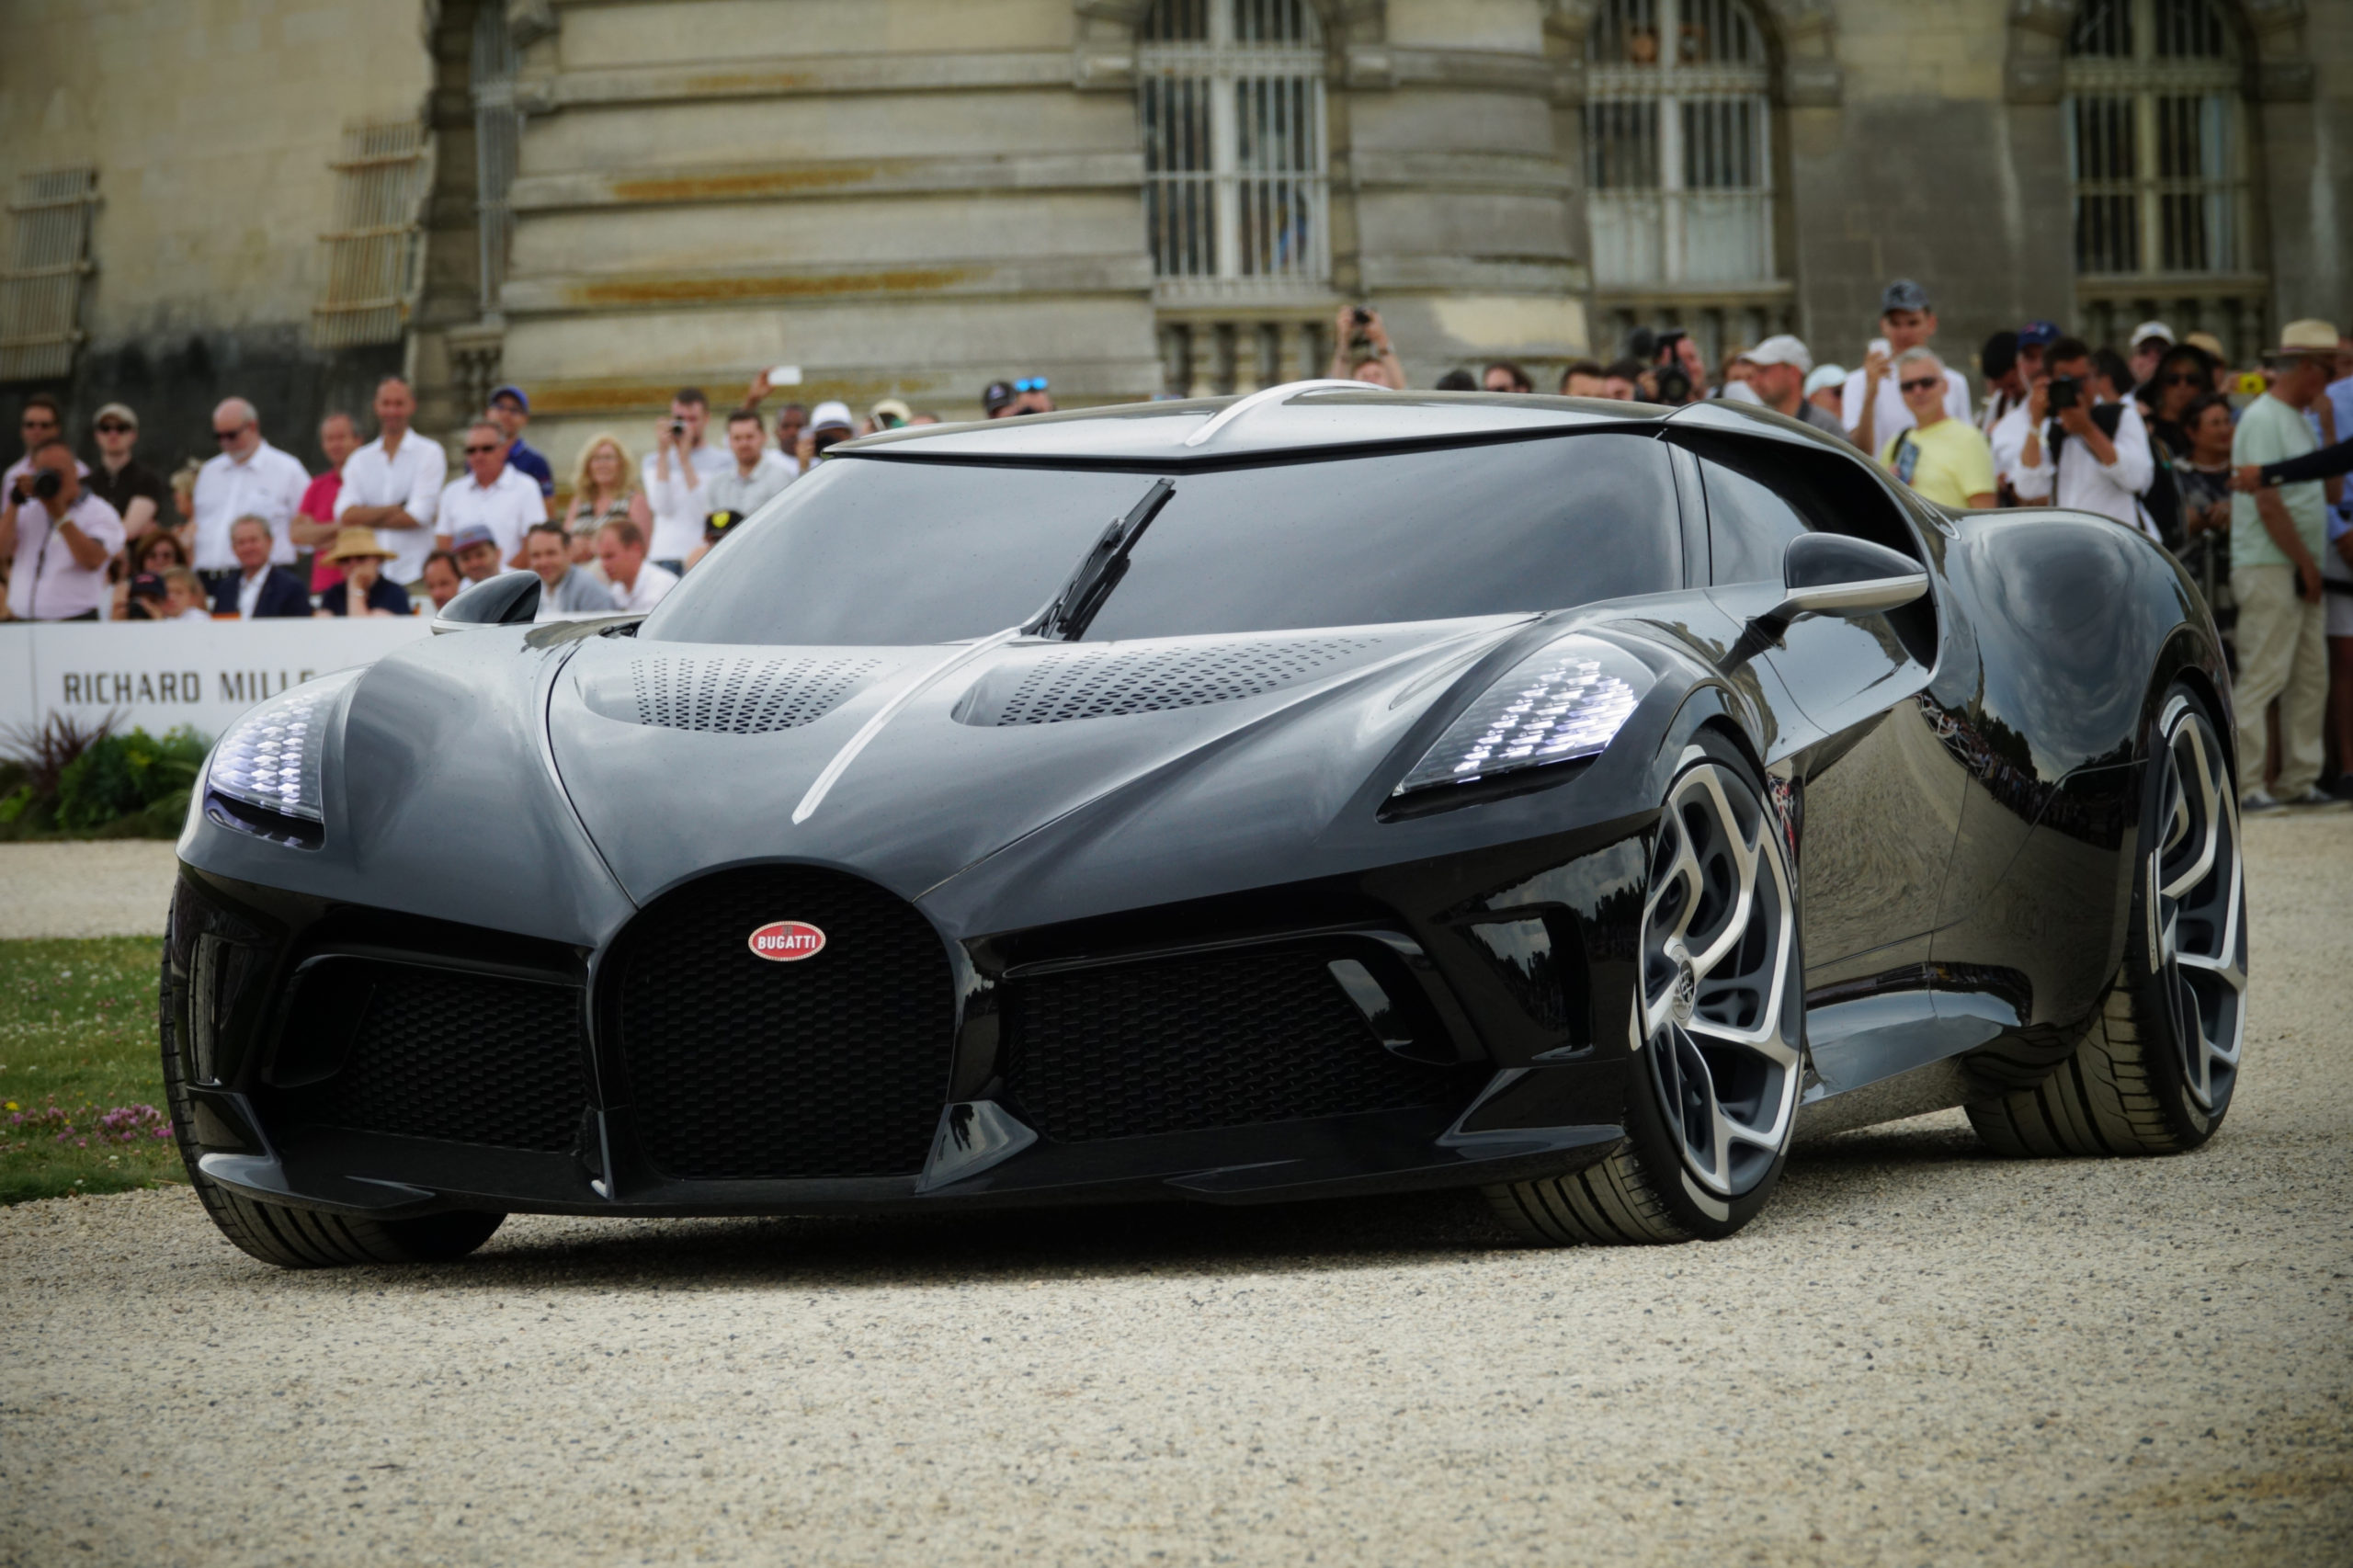 Top 10 Most Expensive Cars in the World 2022